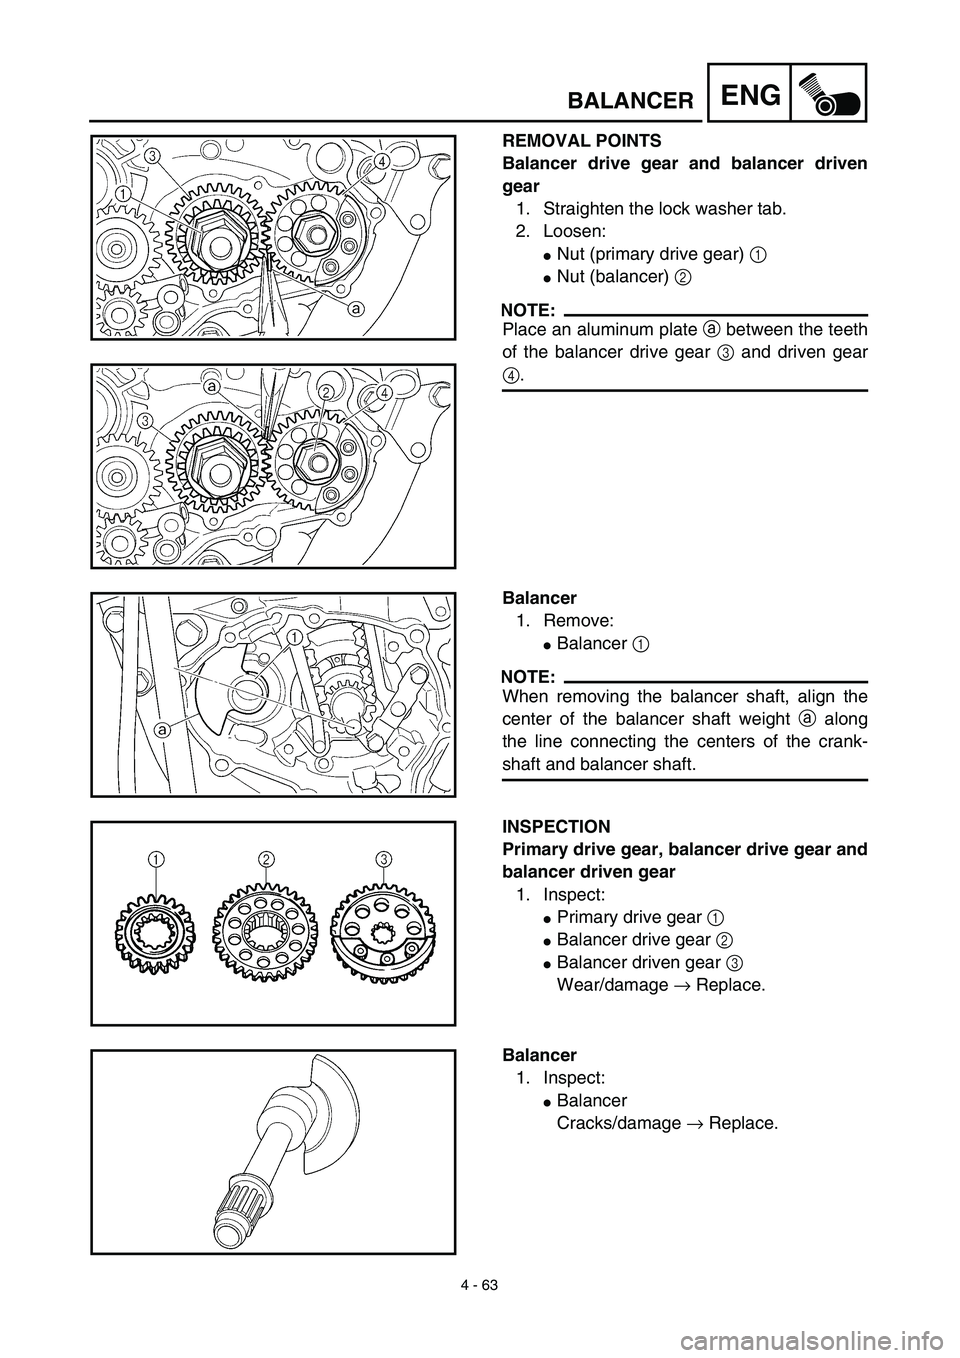 YAMAHA YZ450F 2003  Owners Manual 4 - 63
ENGBALANCER
REMOVAL POINTS
Balancer drive gear and balancer driven
gear
1. Straighten the lock washer tab.
2. Loosen:
Nut (primary drive gear) 1 
Nut (balancer) 2 
NOTE:
Place an aluminum pla